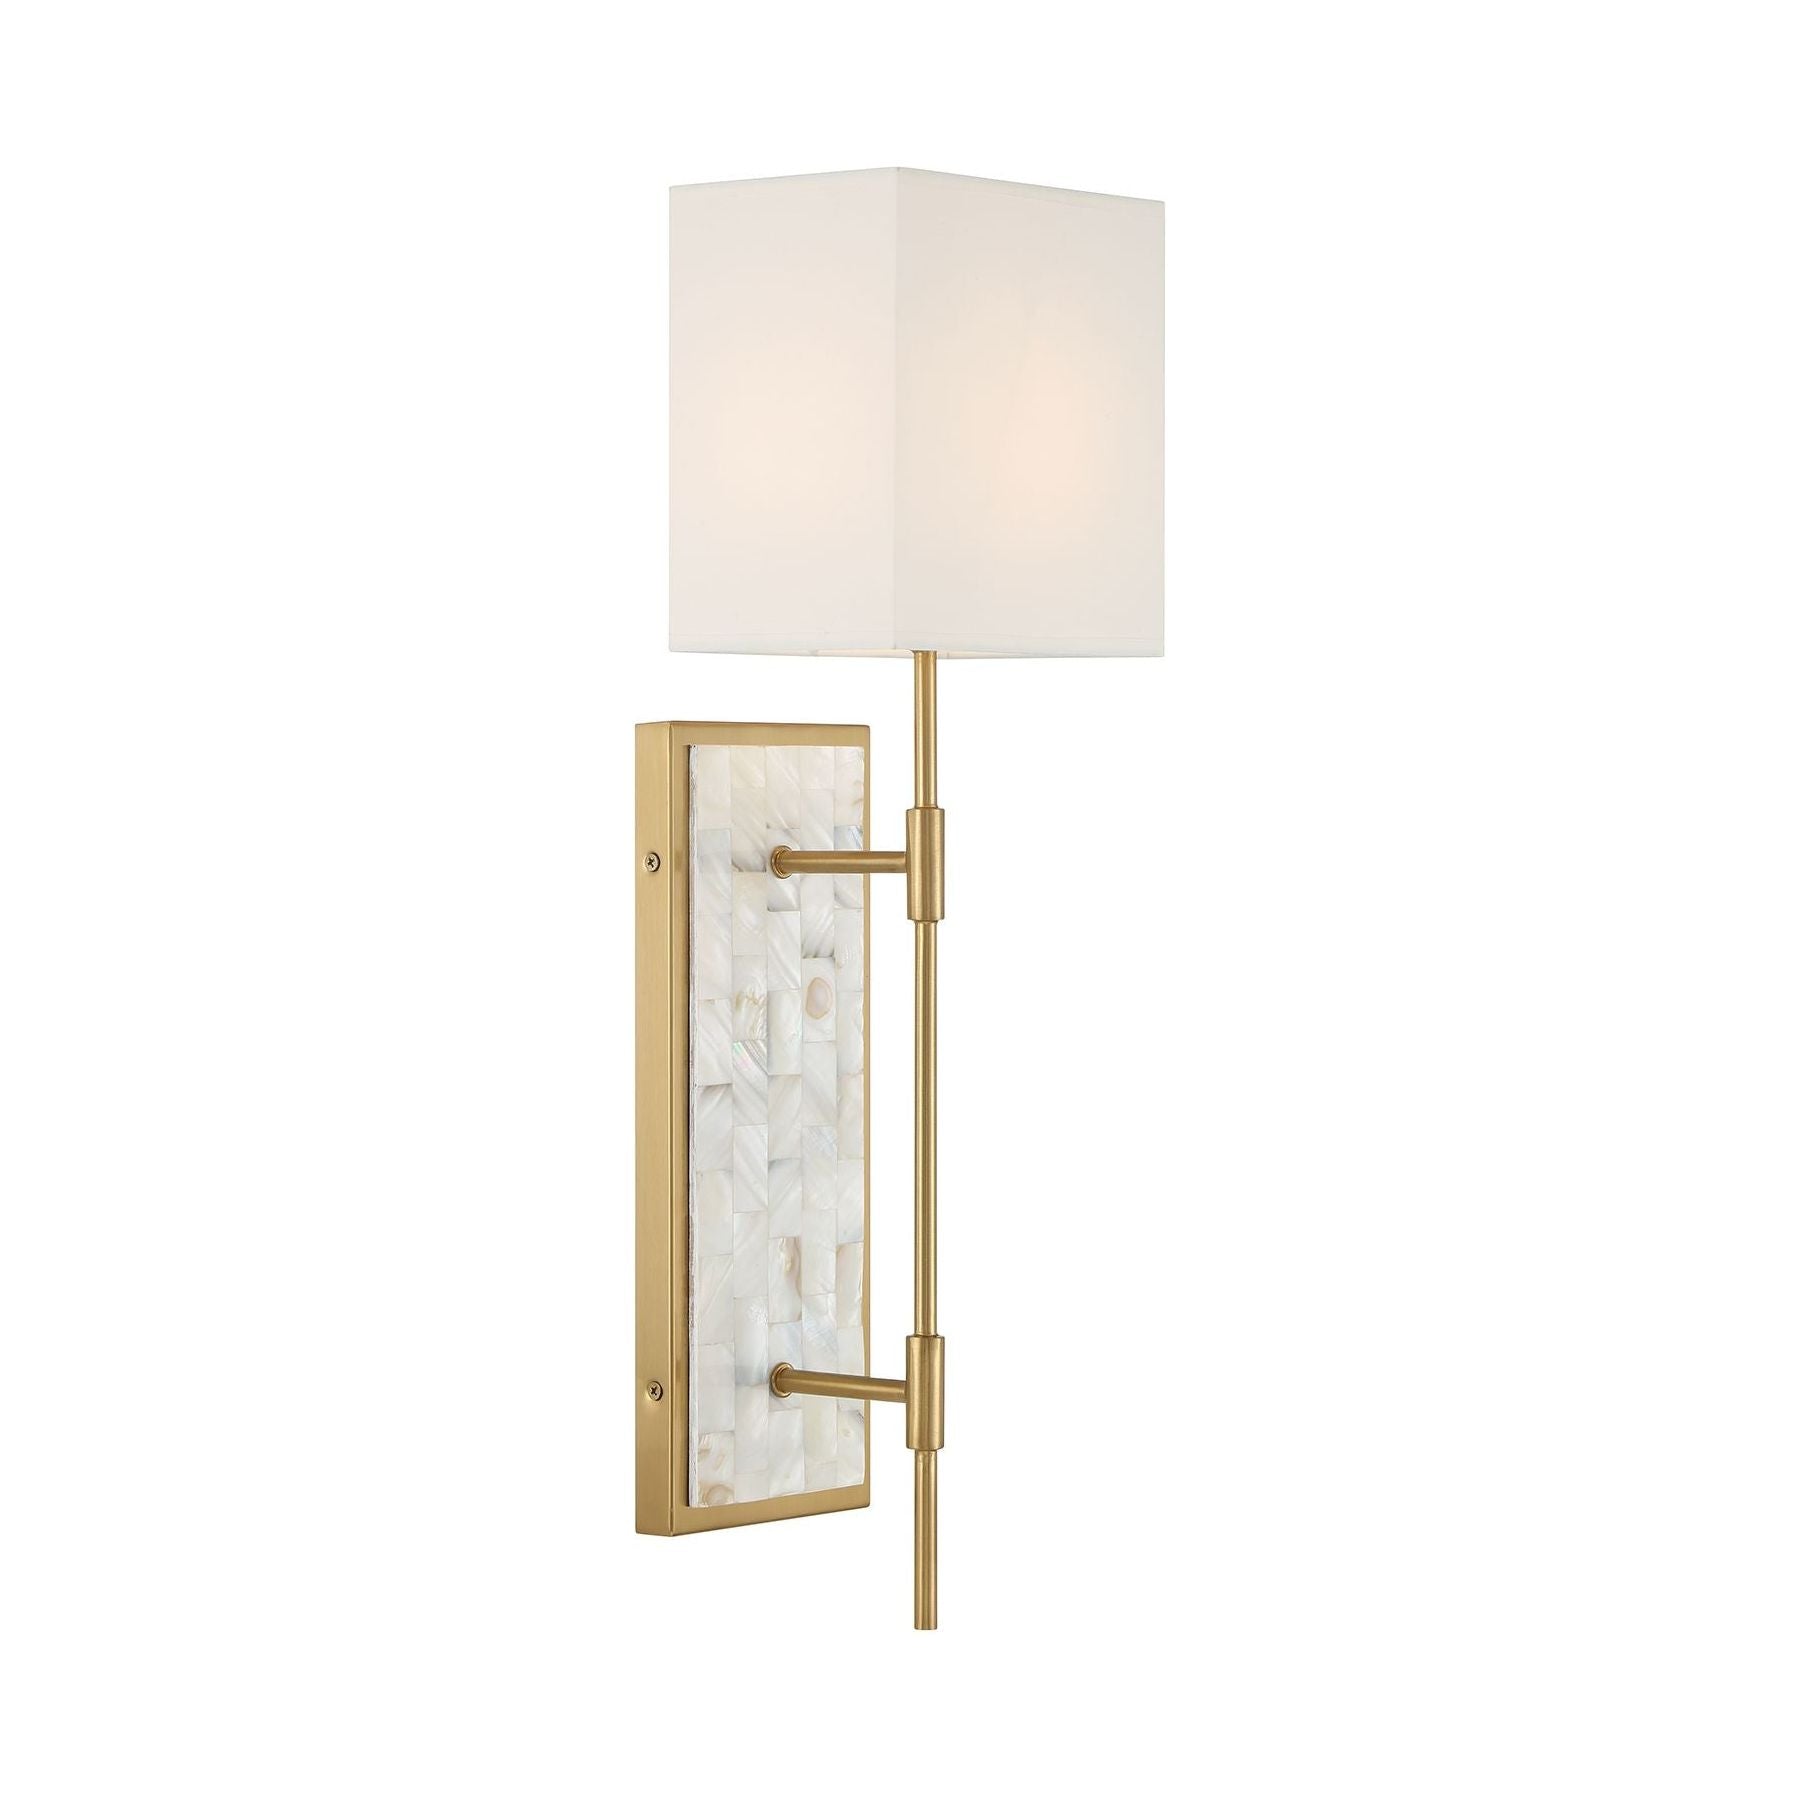 Eastover 1-Light Wall Sconce